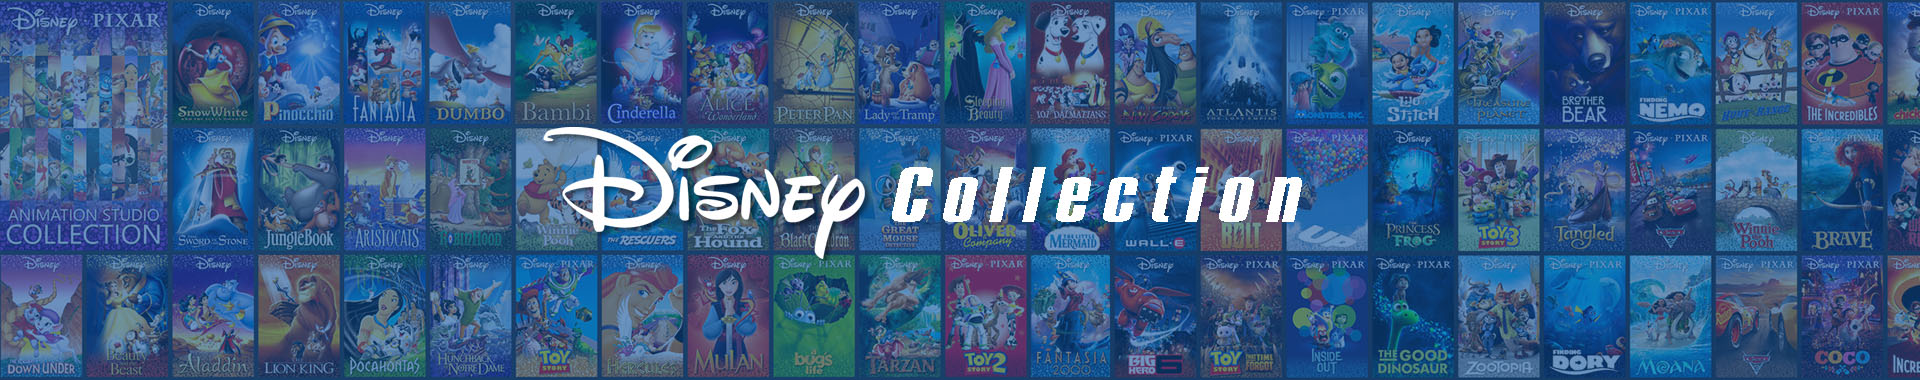 DisneyCollection banner